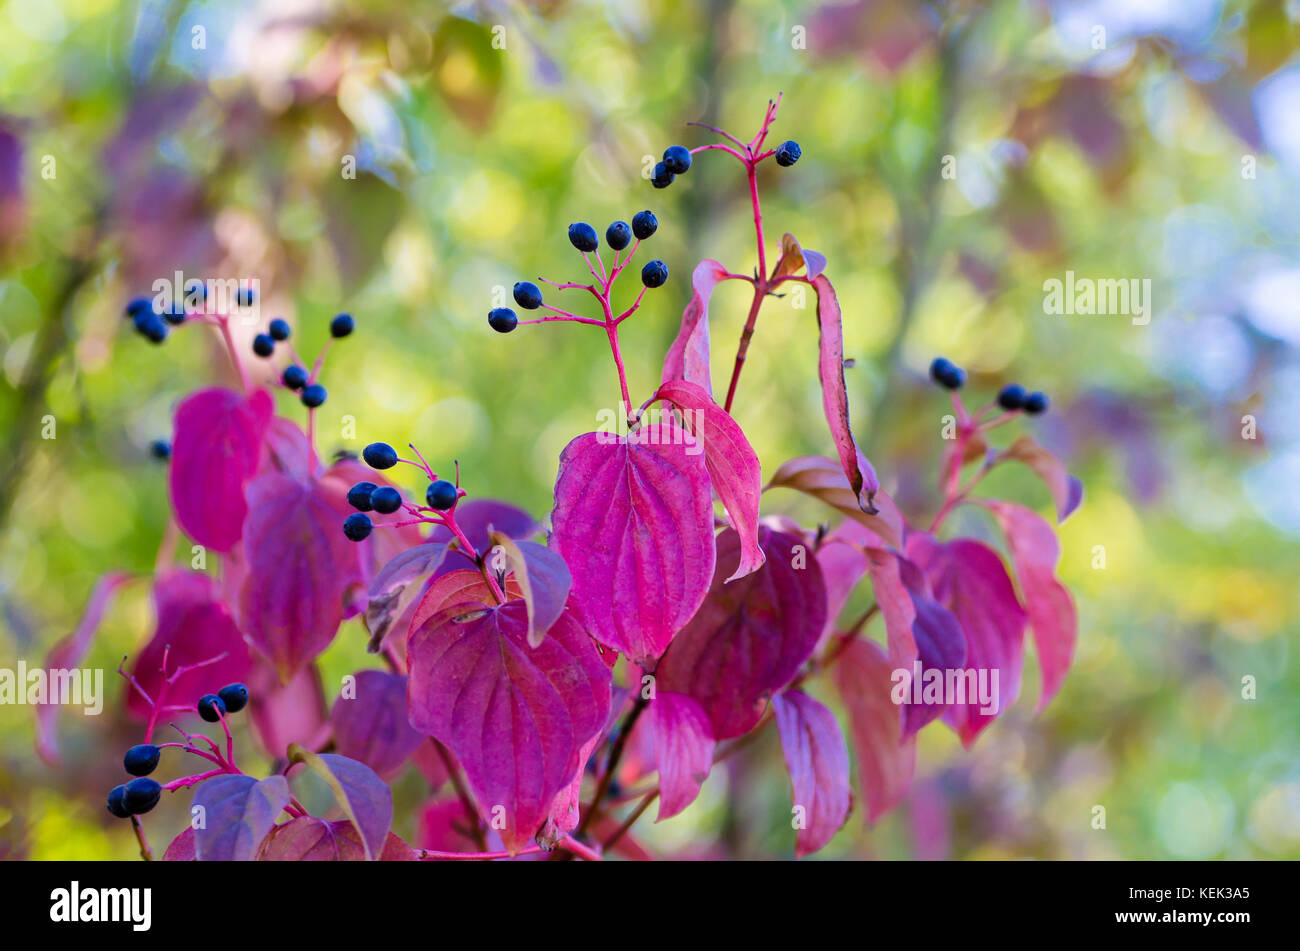 Photographs of Elderberry fruits in the wild on a sunny autumn day Stock Photo